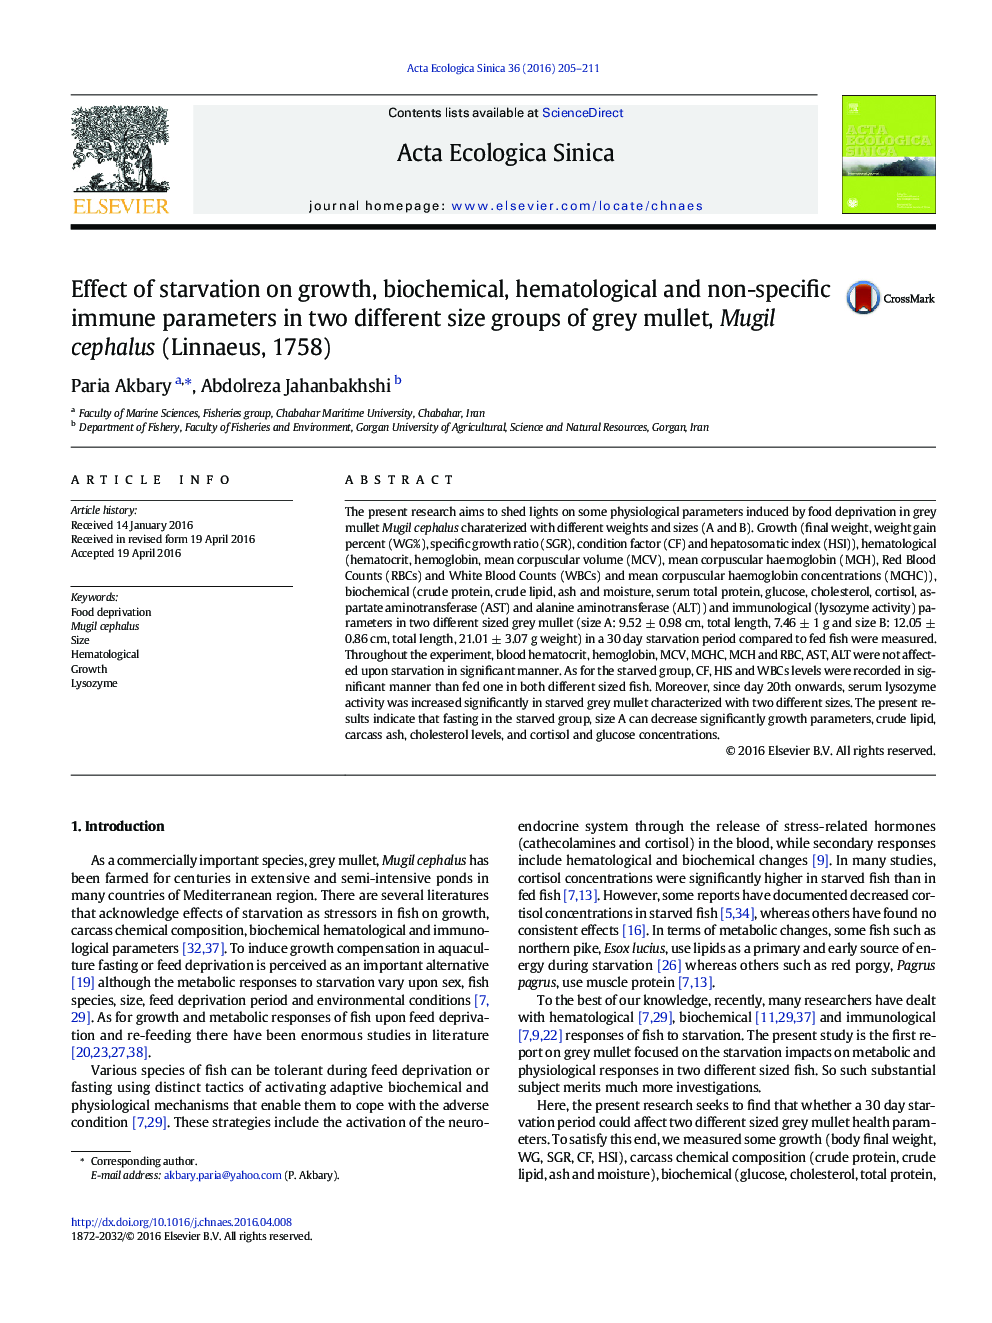 Effect of starvation on growth, biochemical, hematological and non-specific immune parameters in two different size groups of grey mullet, Mugil cephalus (Linnaeus, 1758)